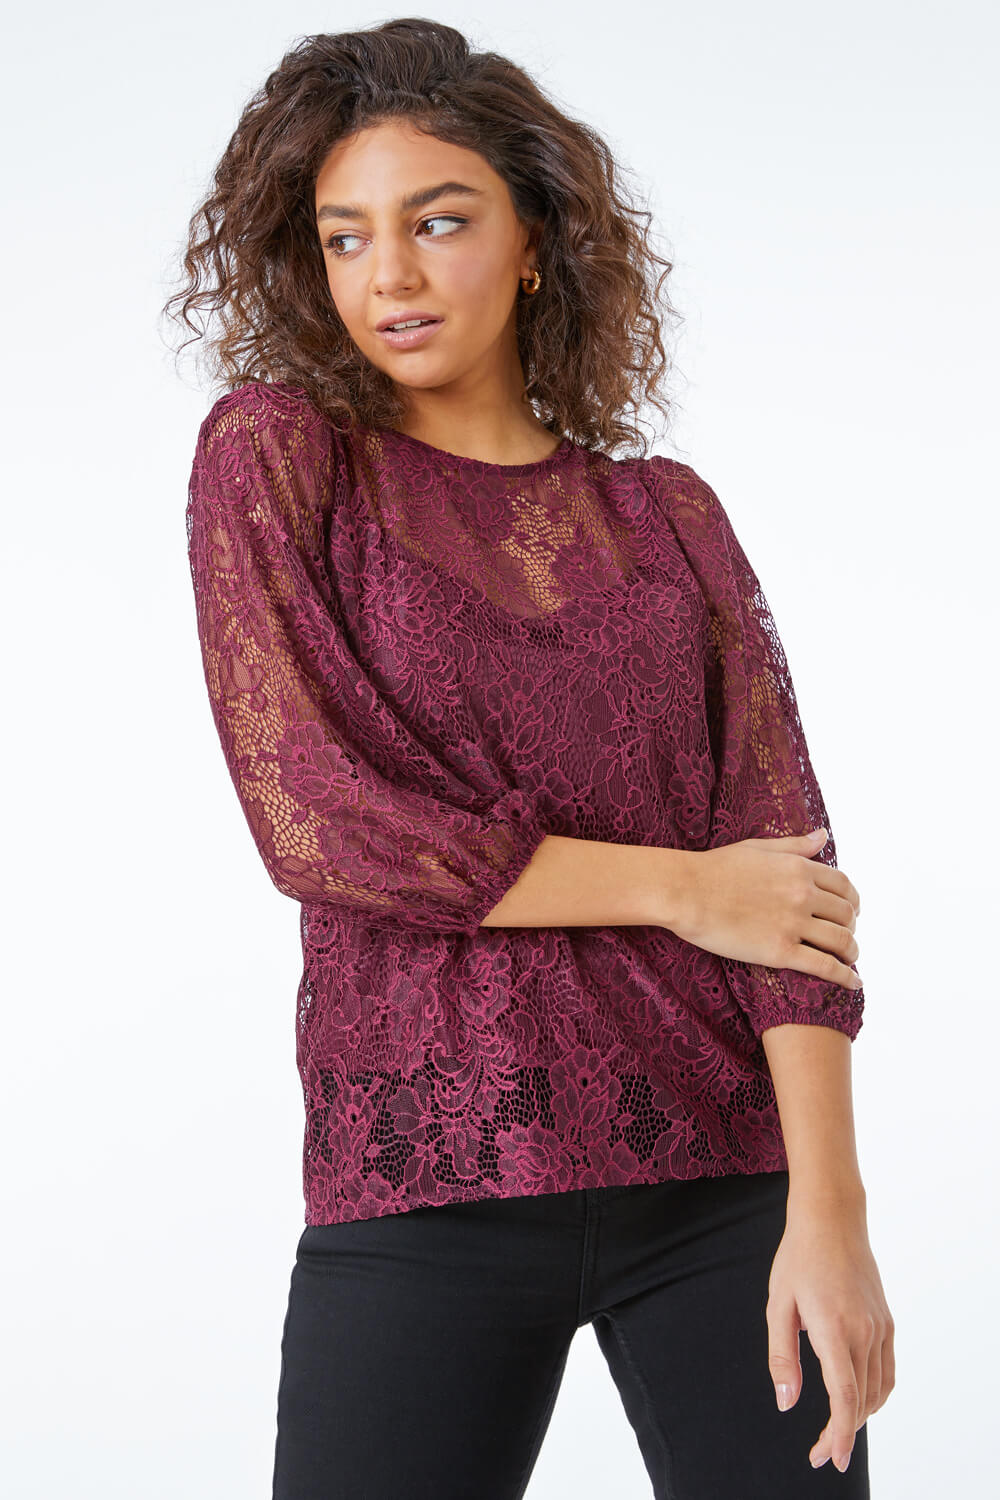 Wine Petite Puff Sleeve Lace Top, Image 2 of 5